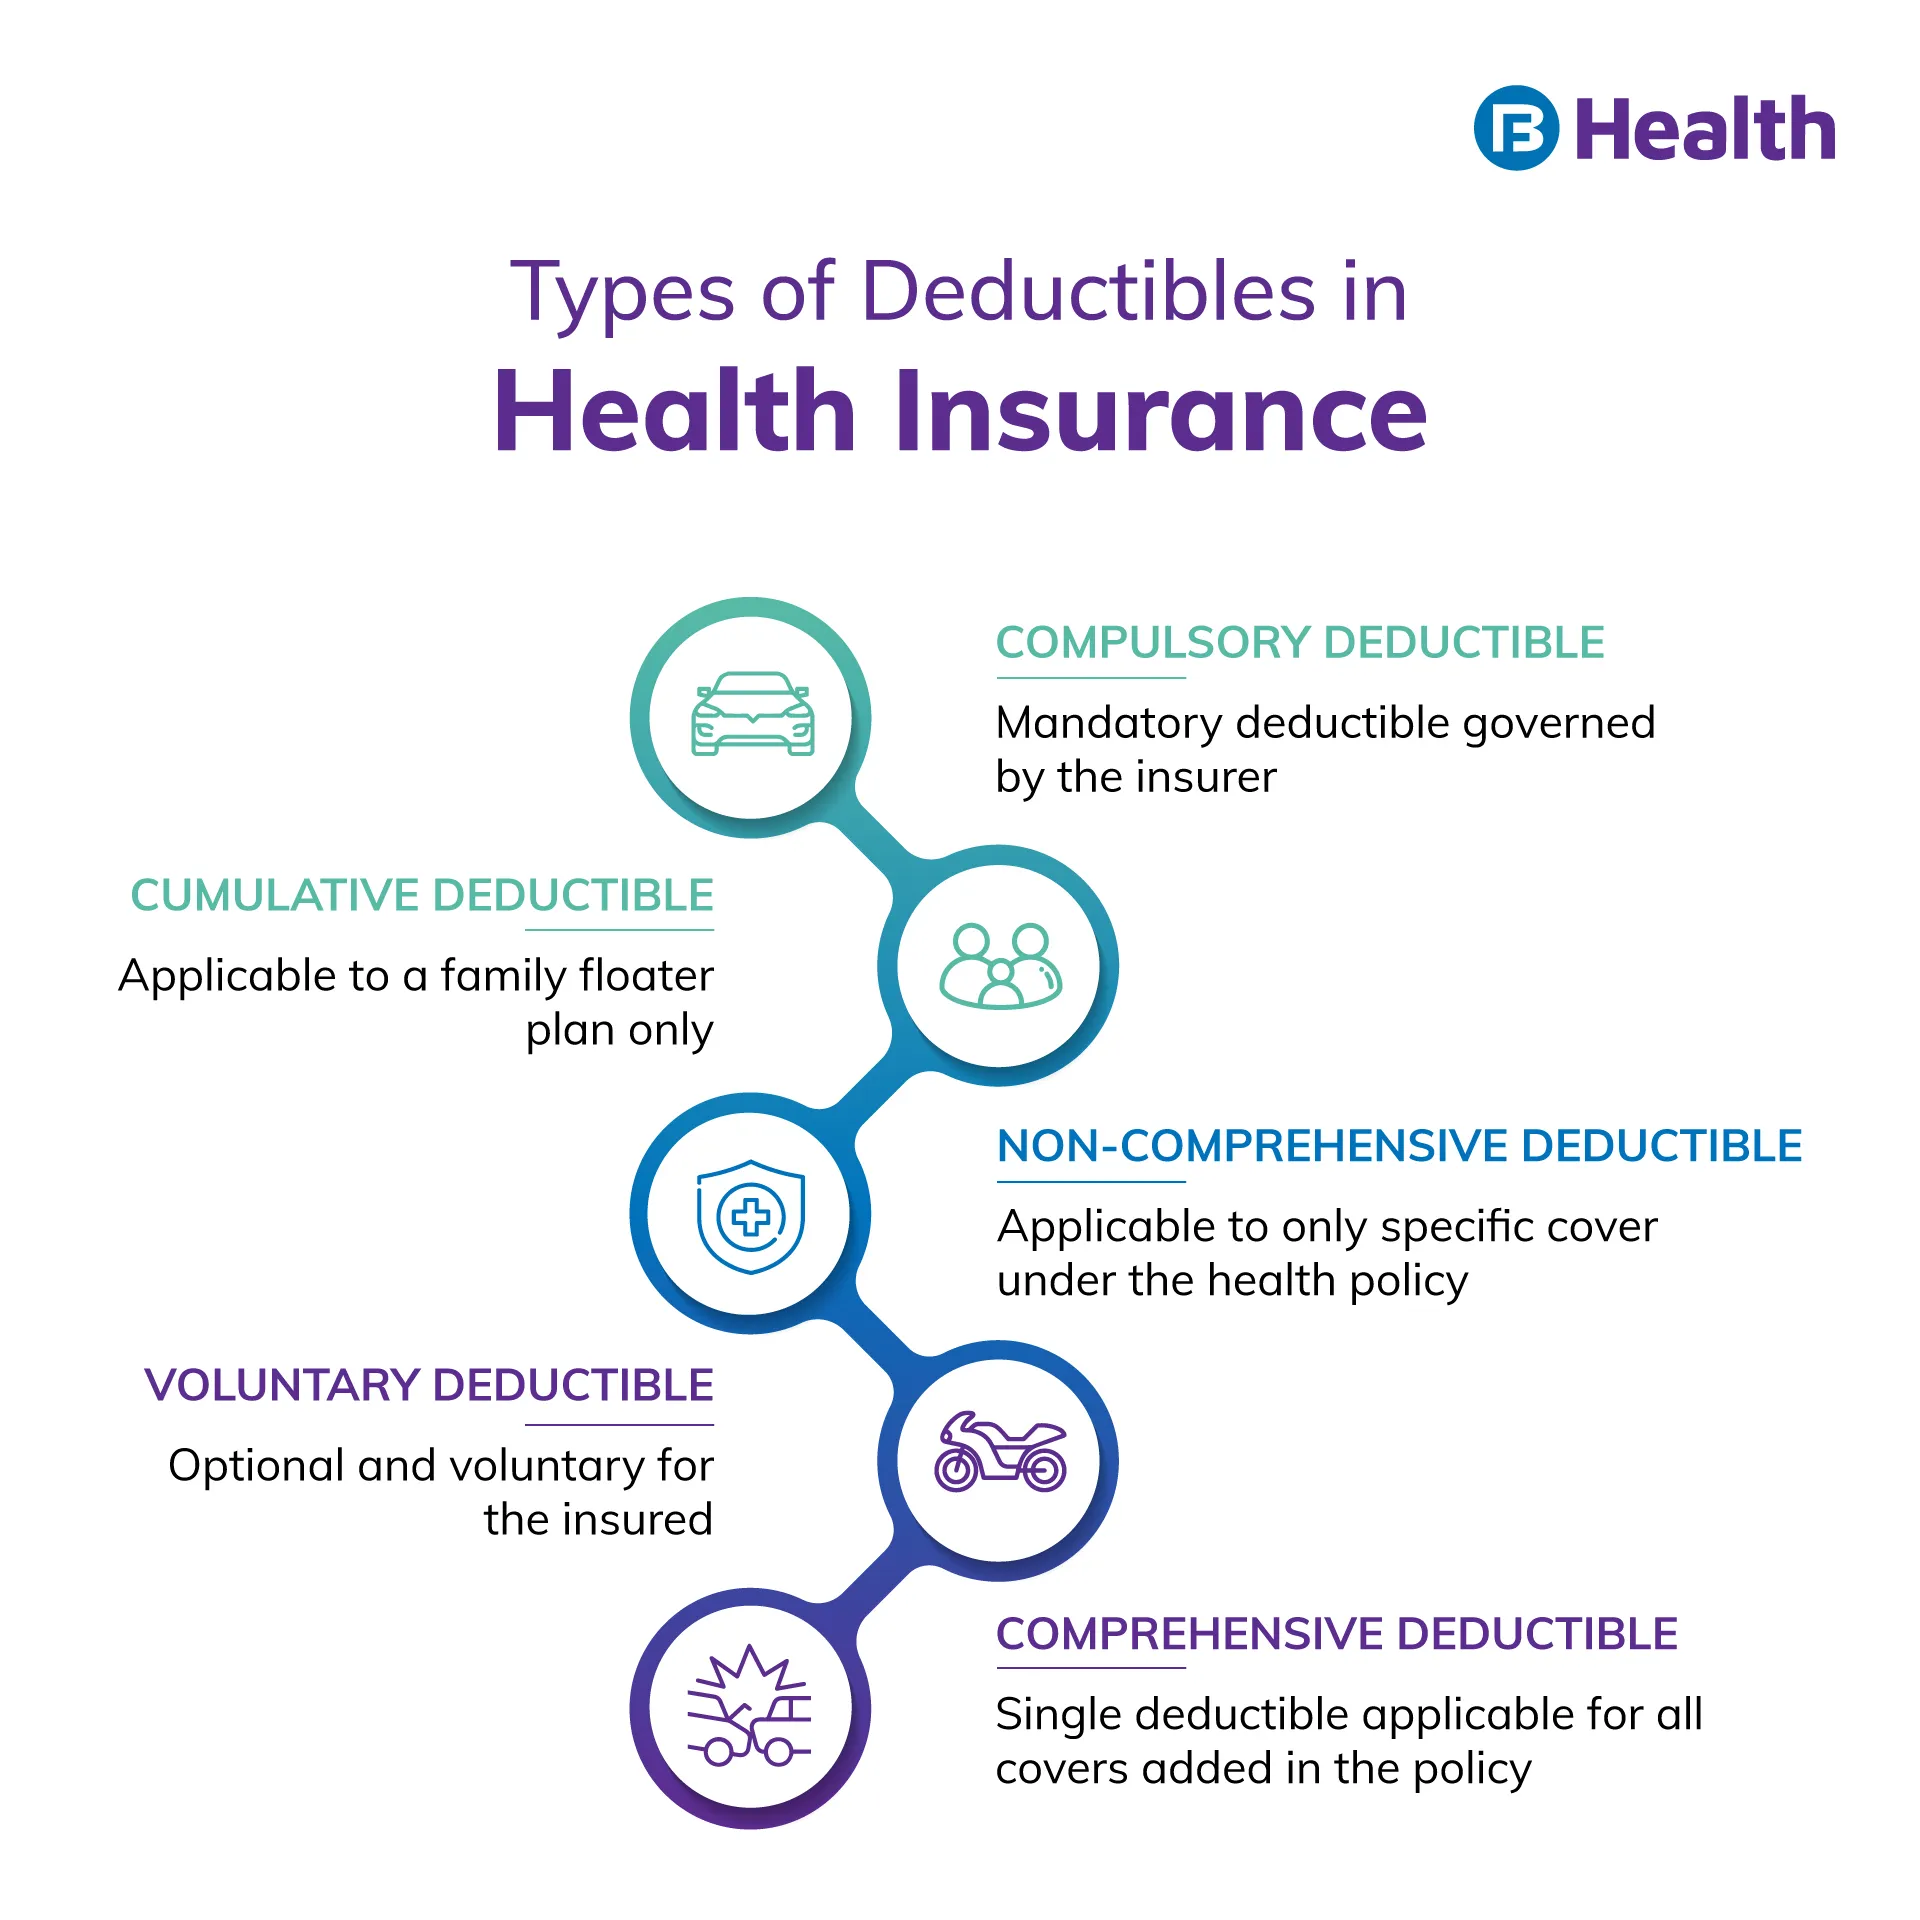 deductibles types in health insurance